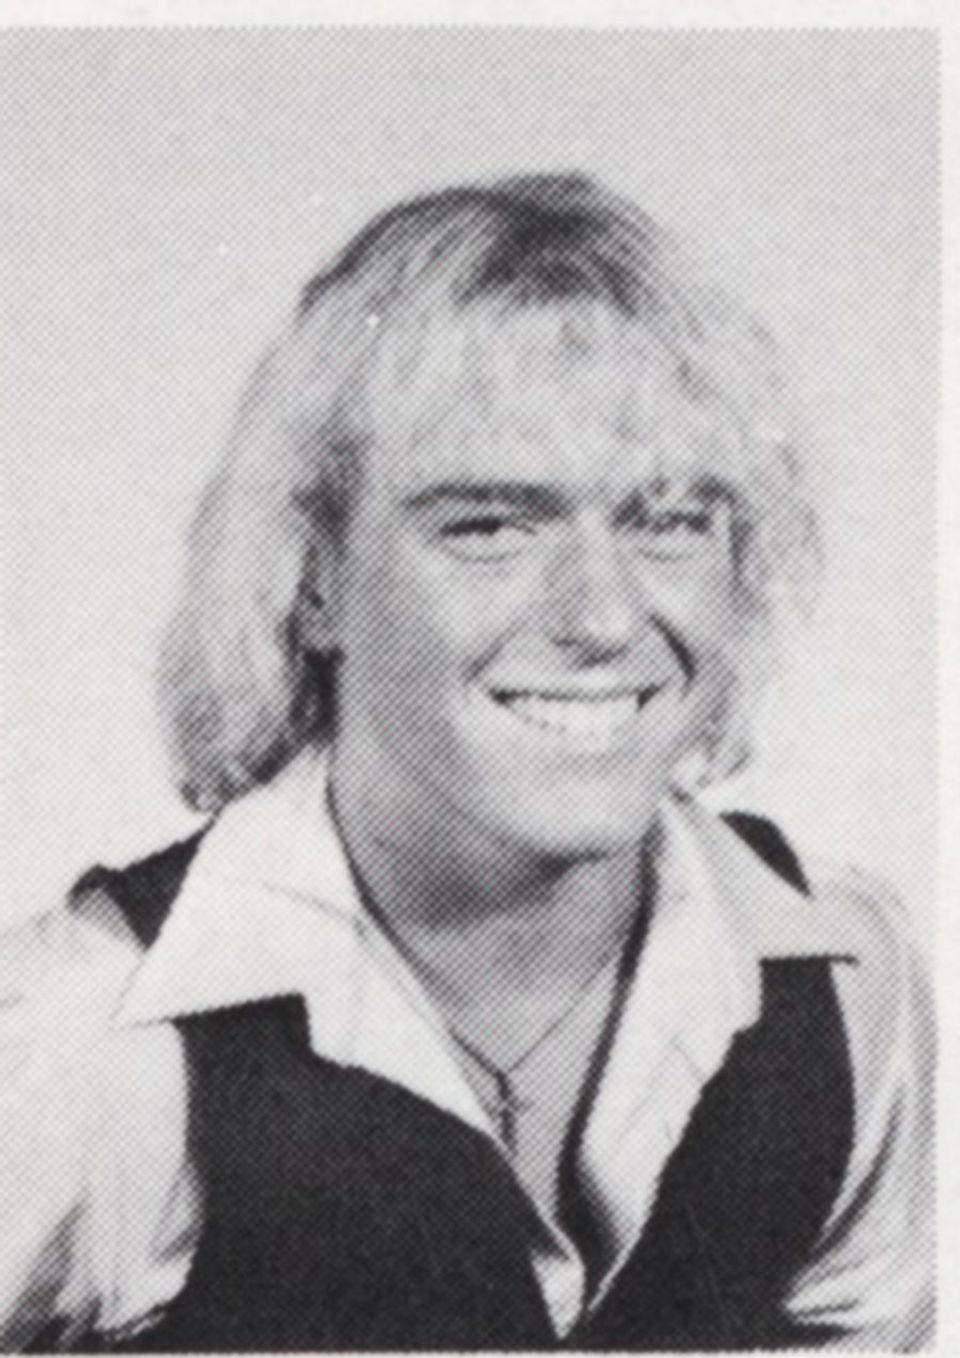 Breaking Bad' Star Dean Norris' High School Yearbook Photo Is All About His  Male Perm